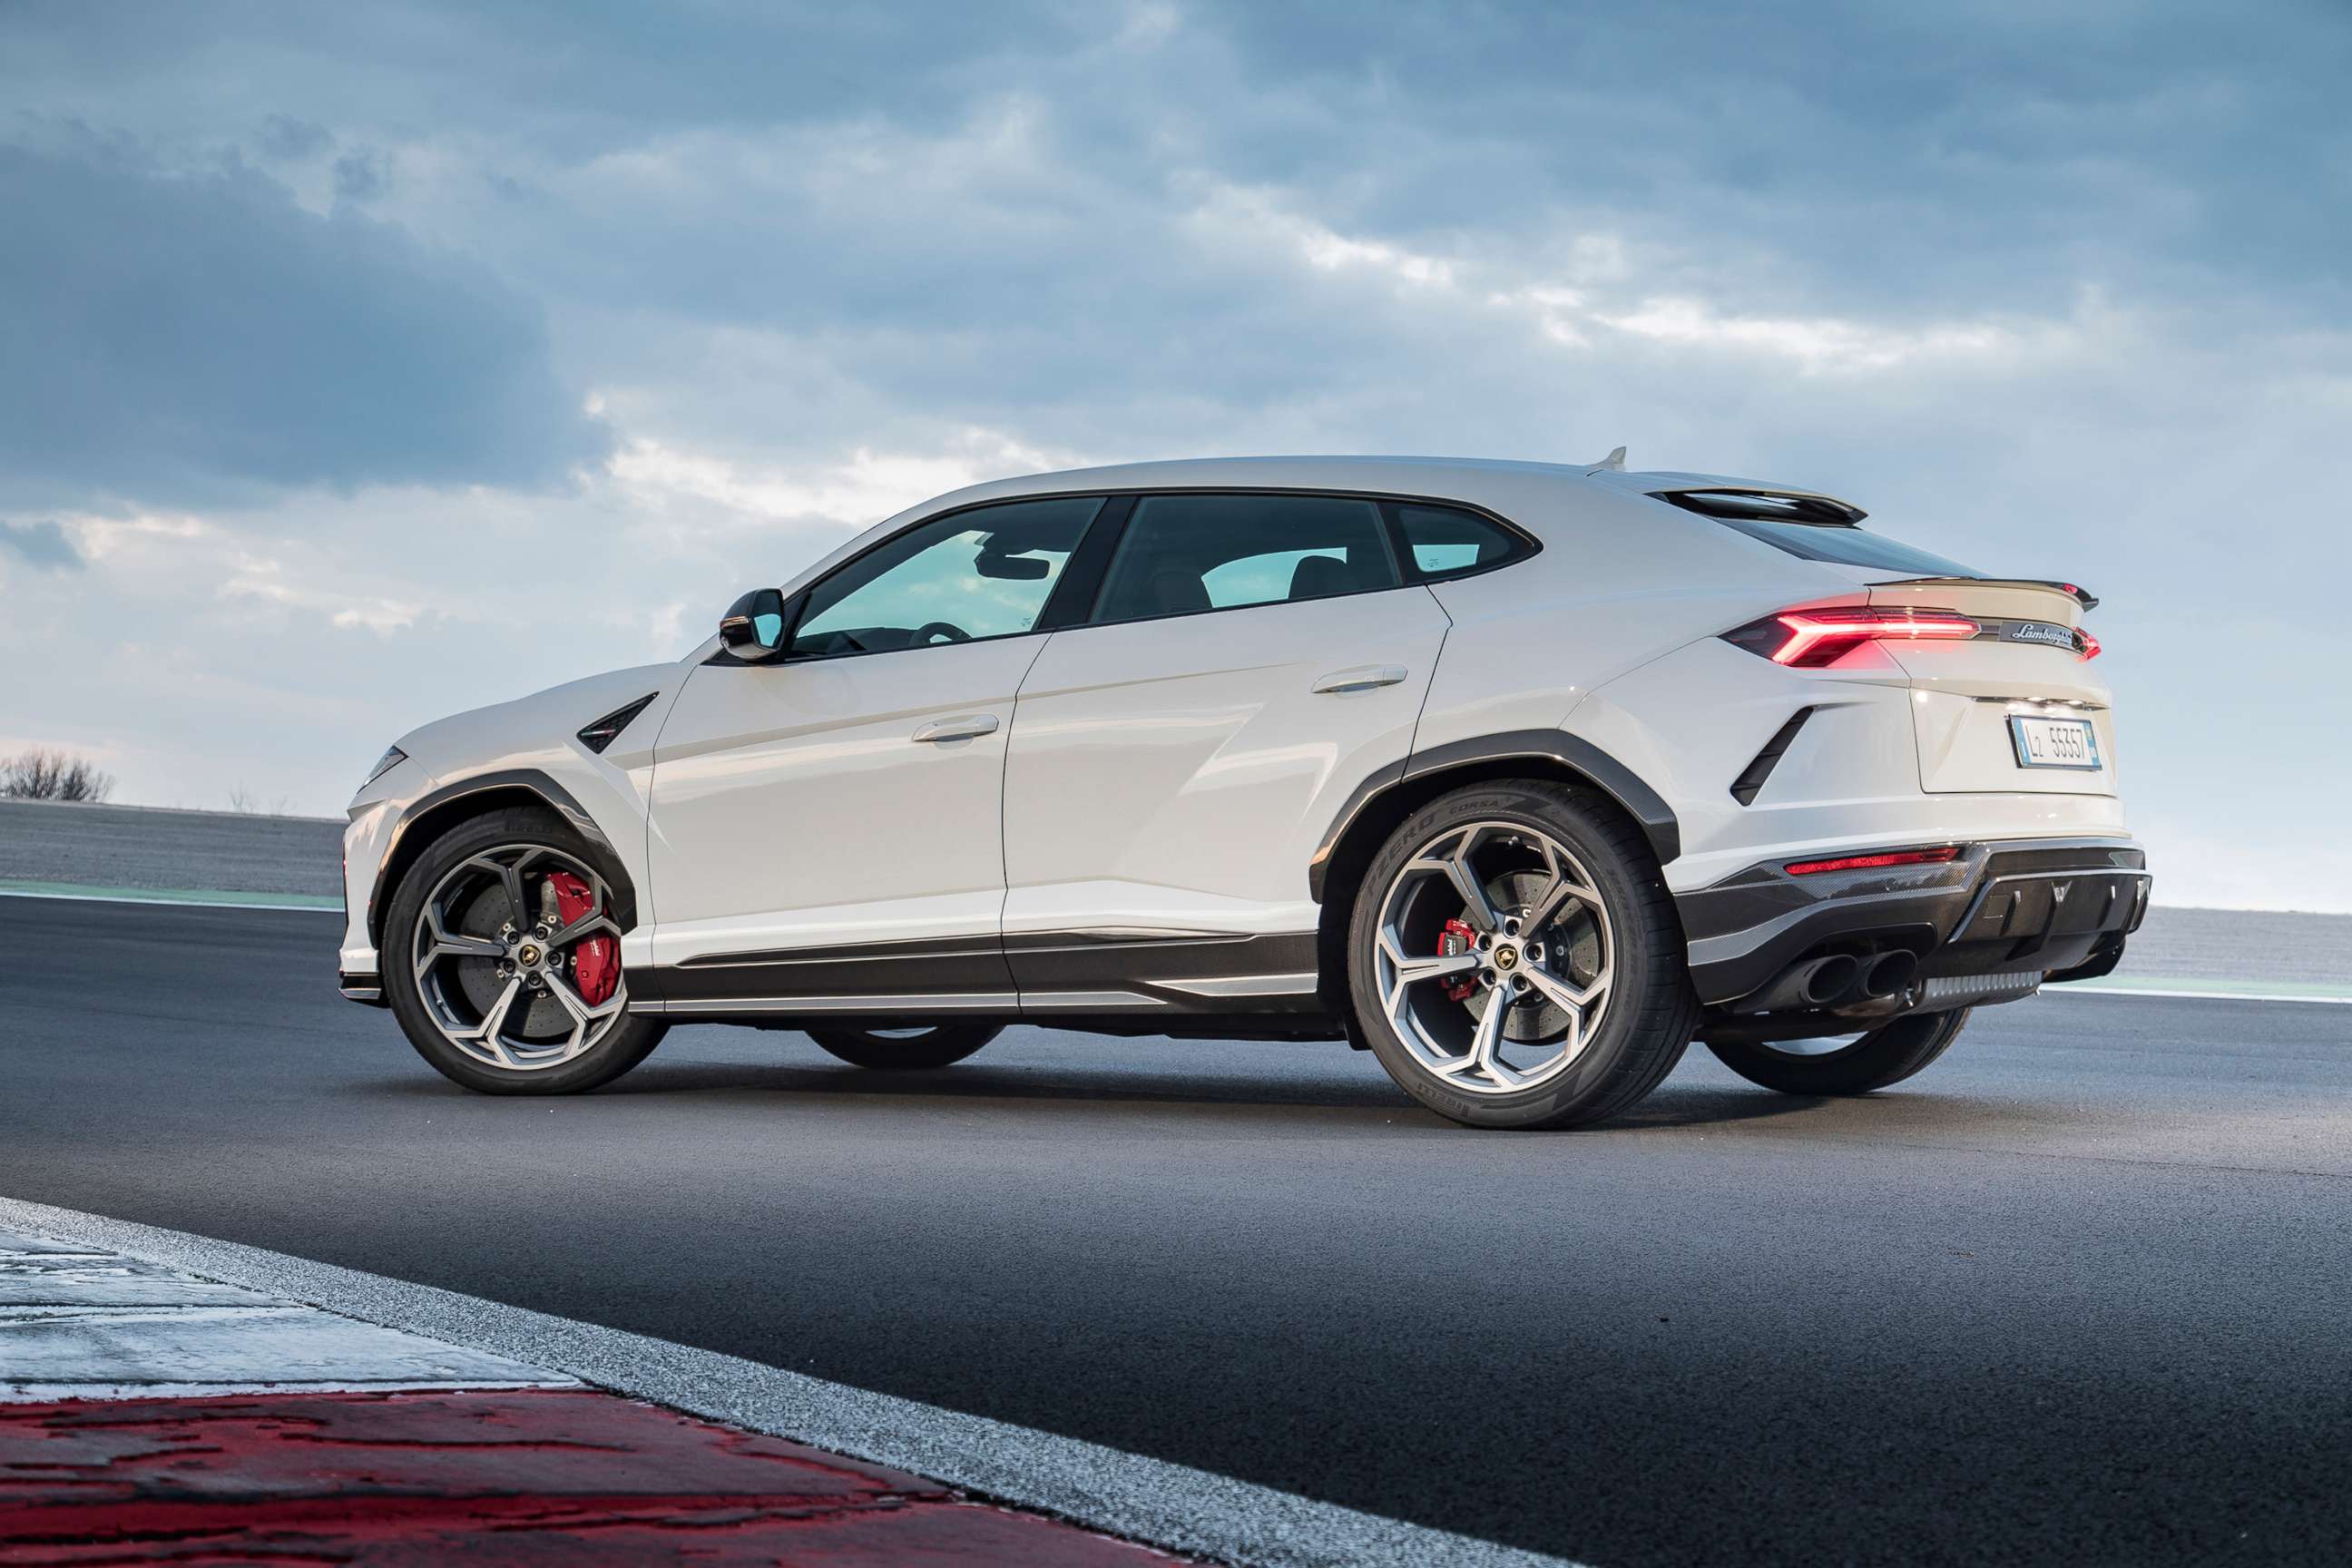 PHOTO: The Urus, Lamborghini's only SUV, features a 4.0-liter V8 twin-turbo engine that makes 650 horsepower.